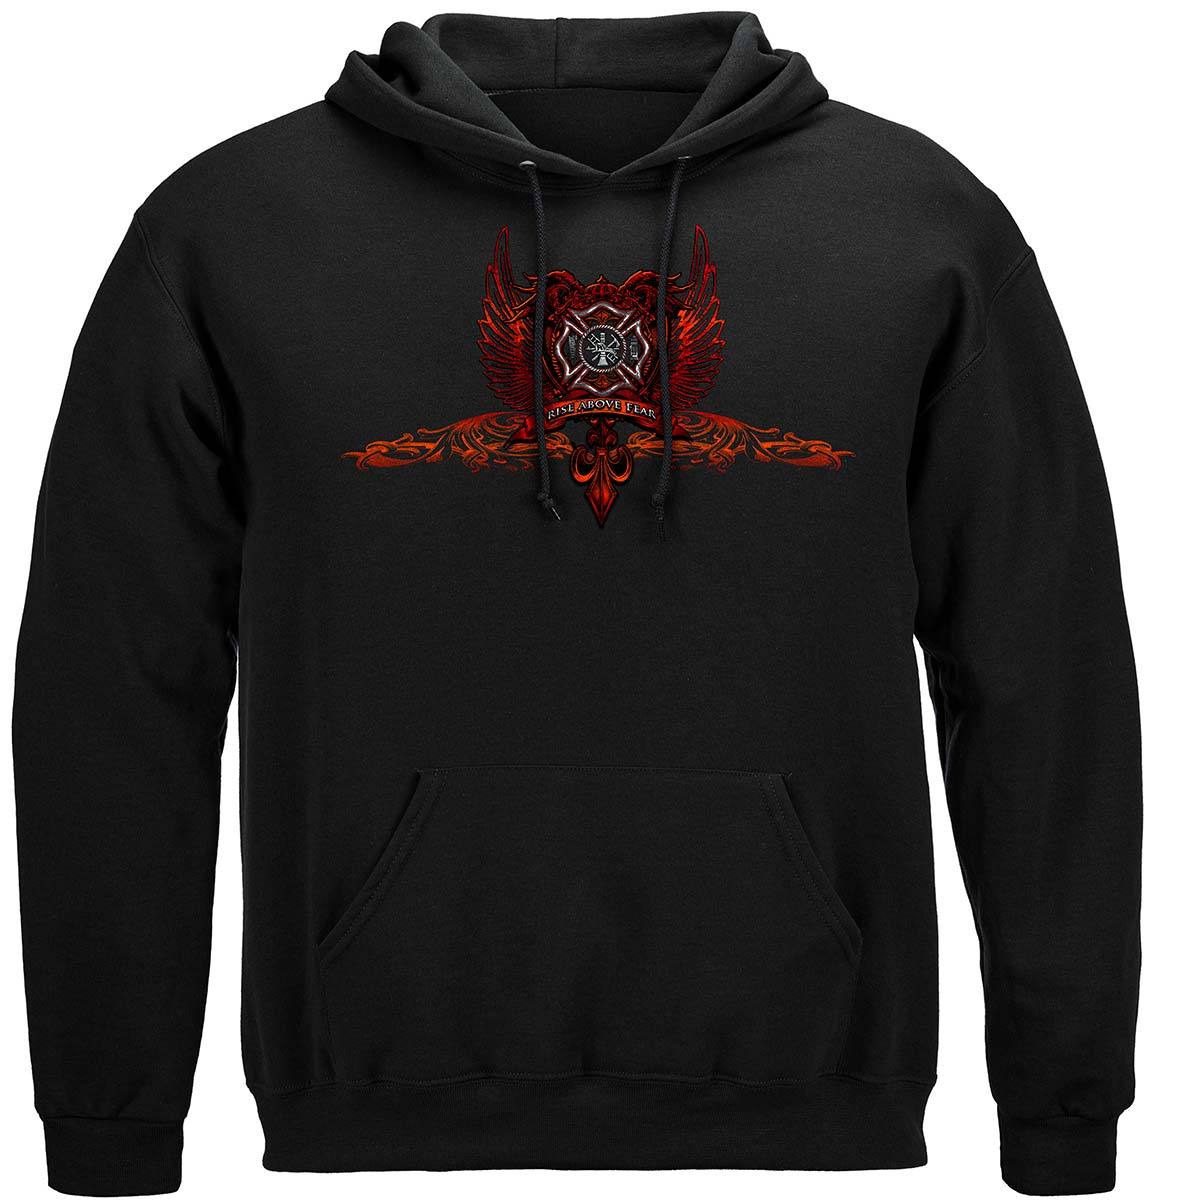 Firefighter Red Wings Rise Above Fear Silver Foil Premium Hooded Sweat Shirt